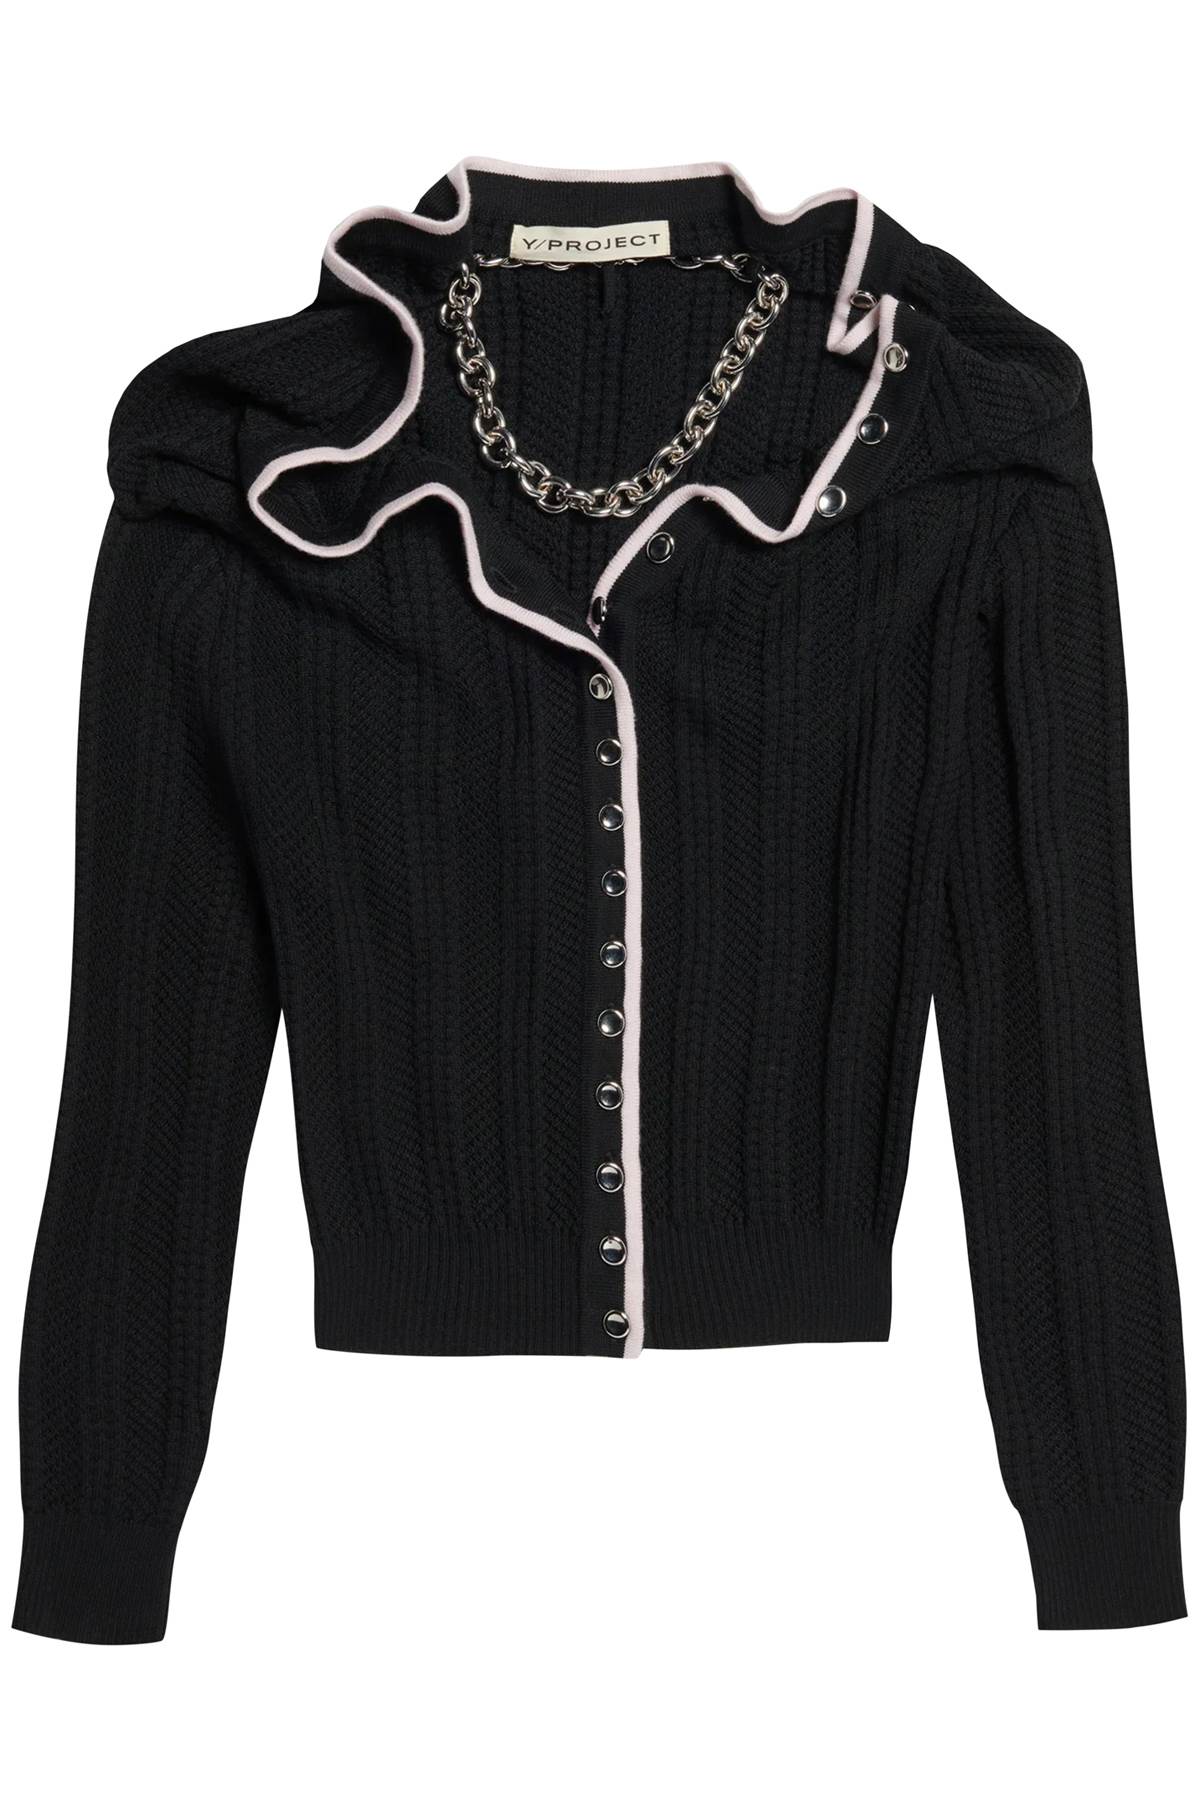 Y/project Black Merino Wool Cardigan With Ruffled Neckline And Chain Necklace For Women